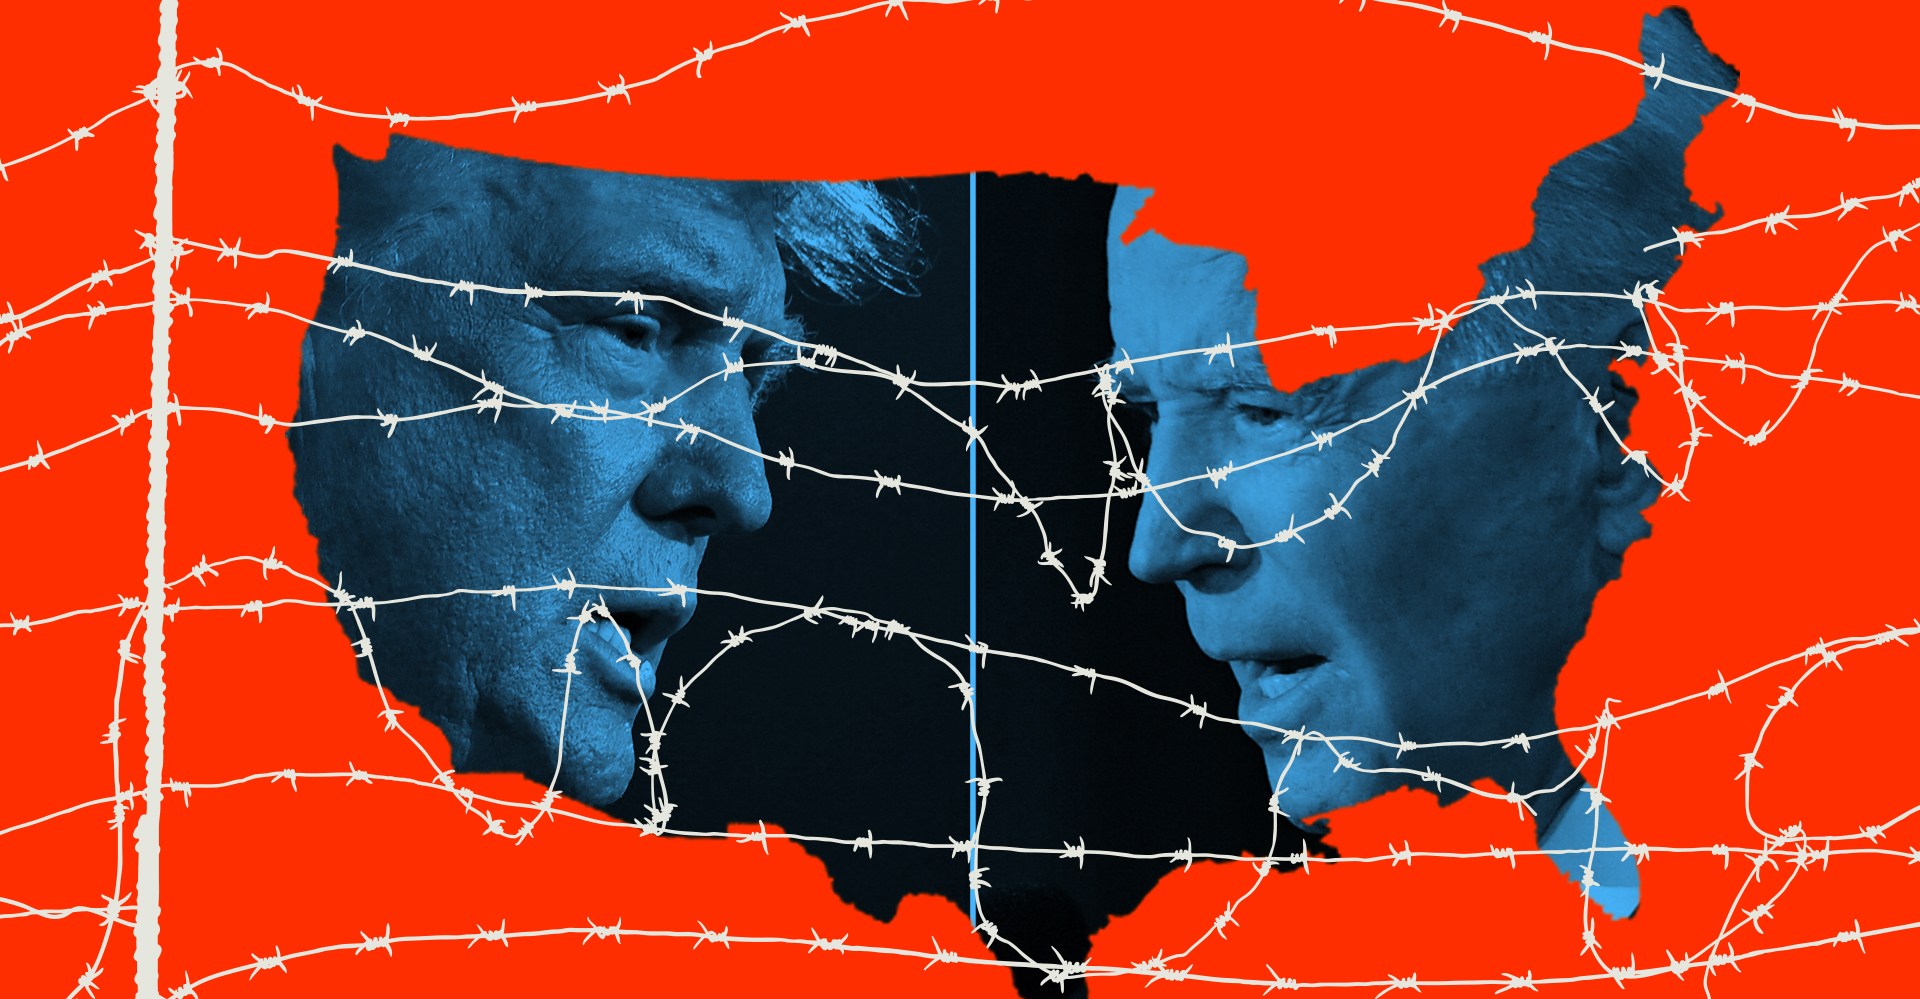 An image of Trump and Biden is in the shape of the United States on a bright red background. A tangle of barbed wire sits on top.